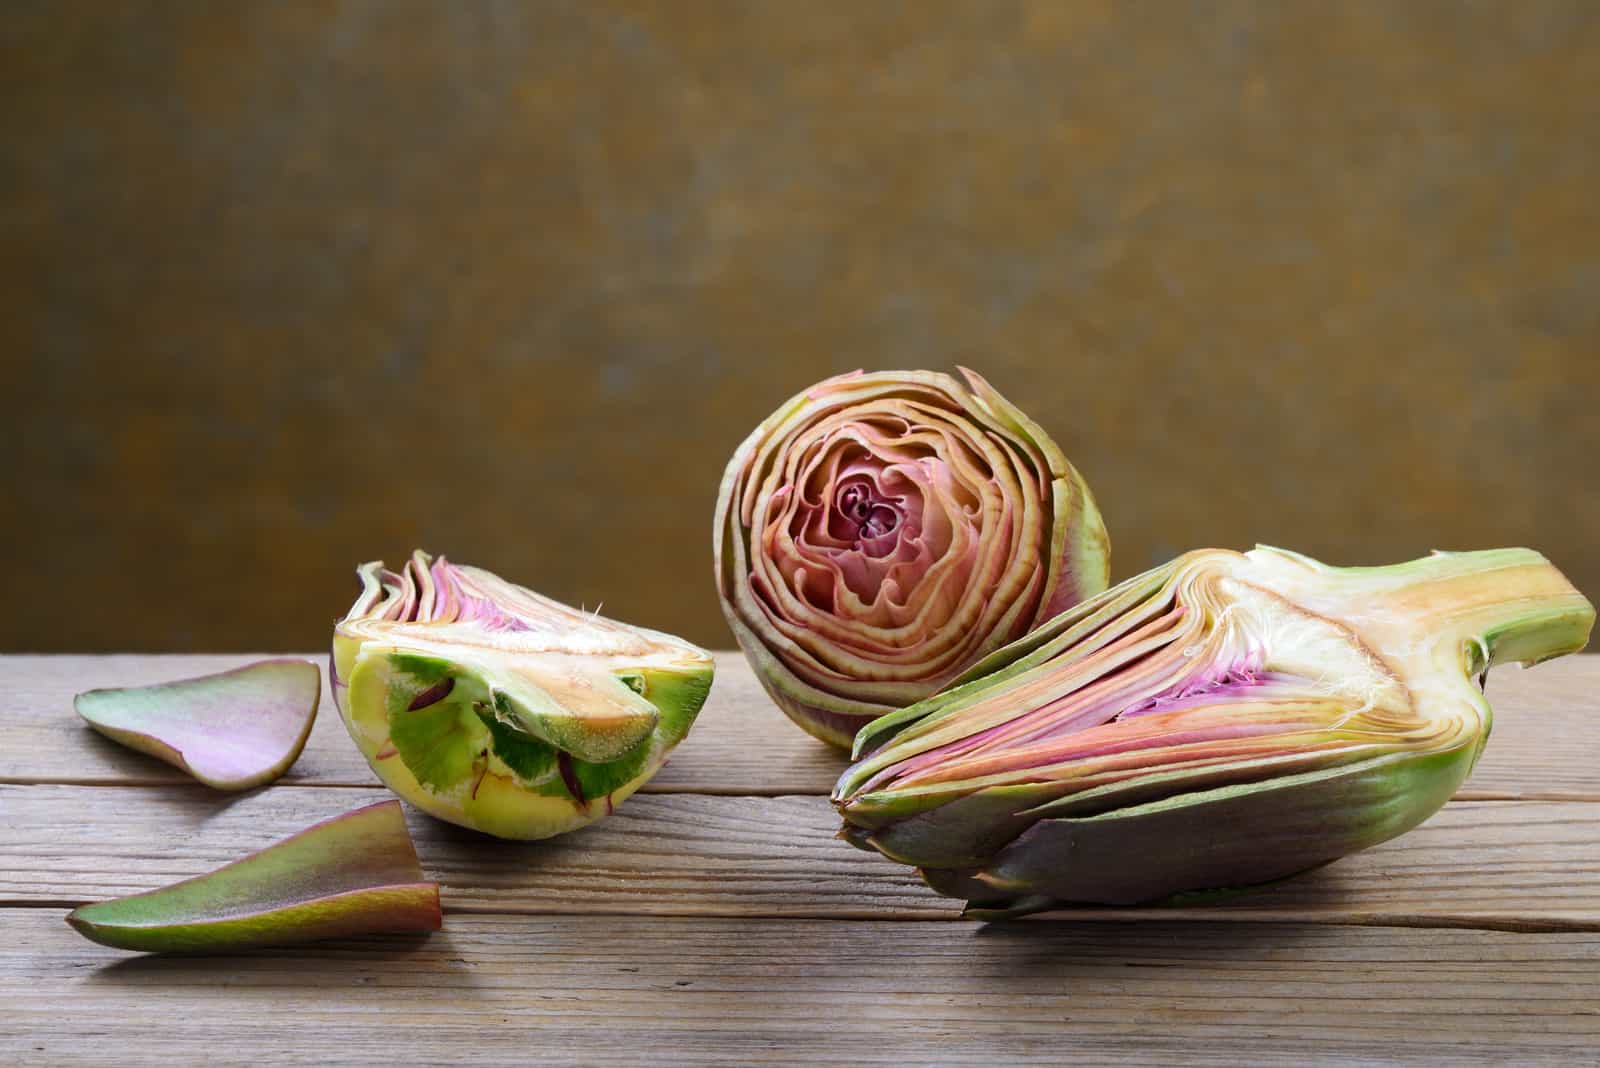 Peeled artichokes on old wooden table